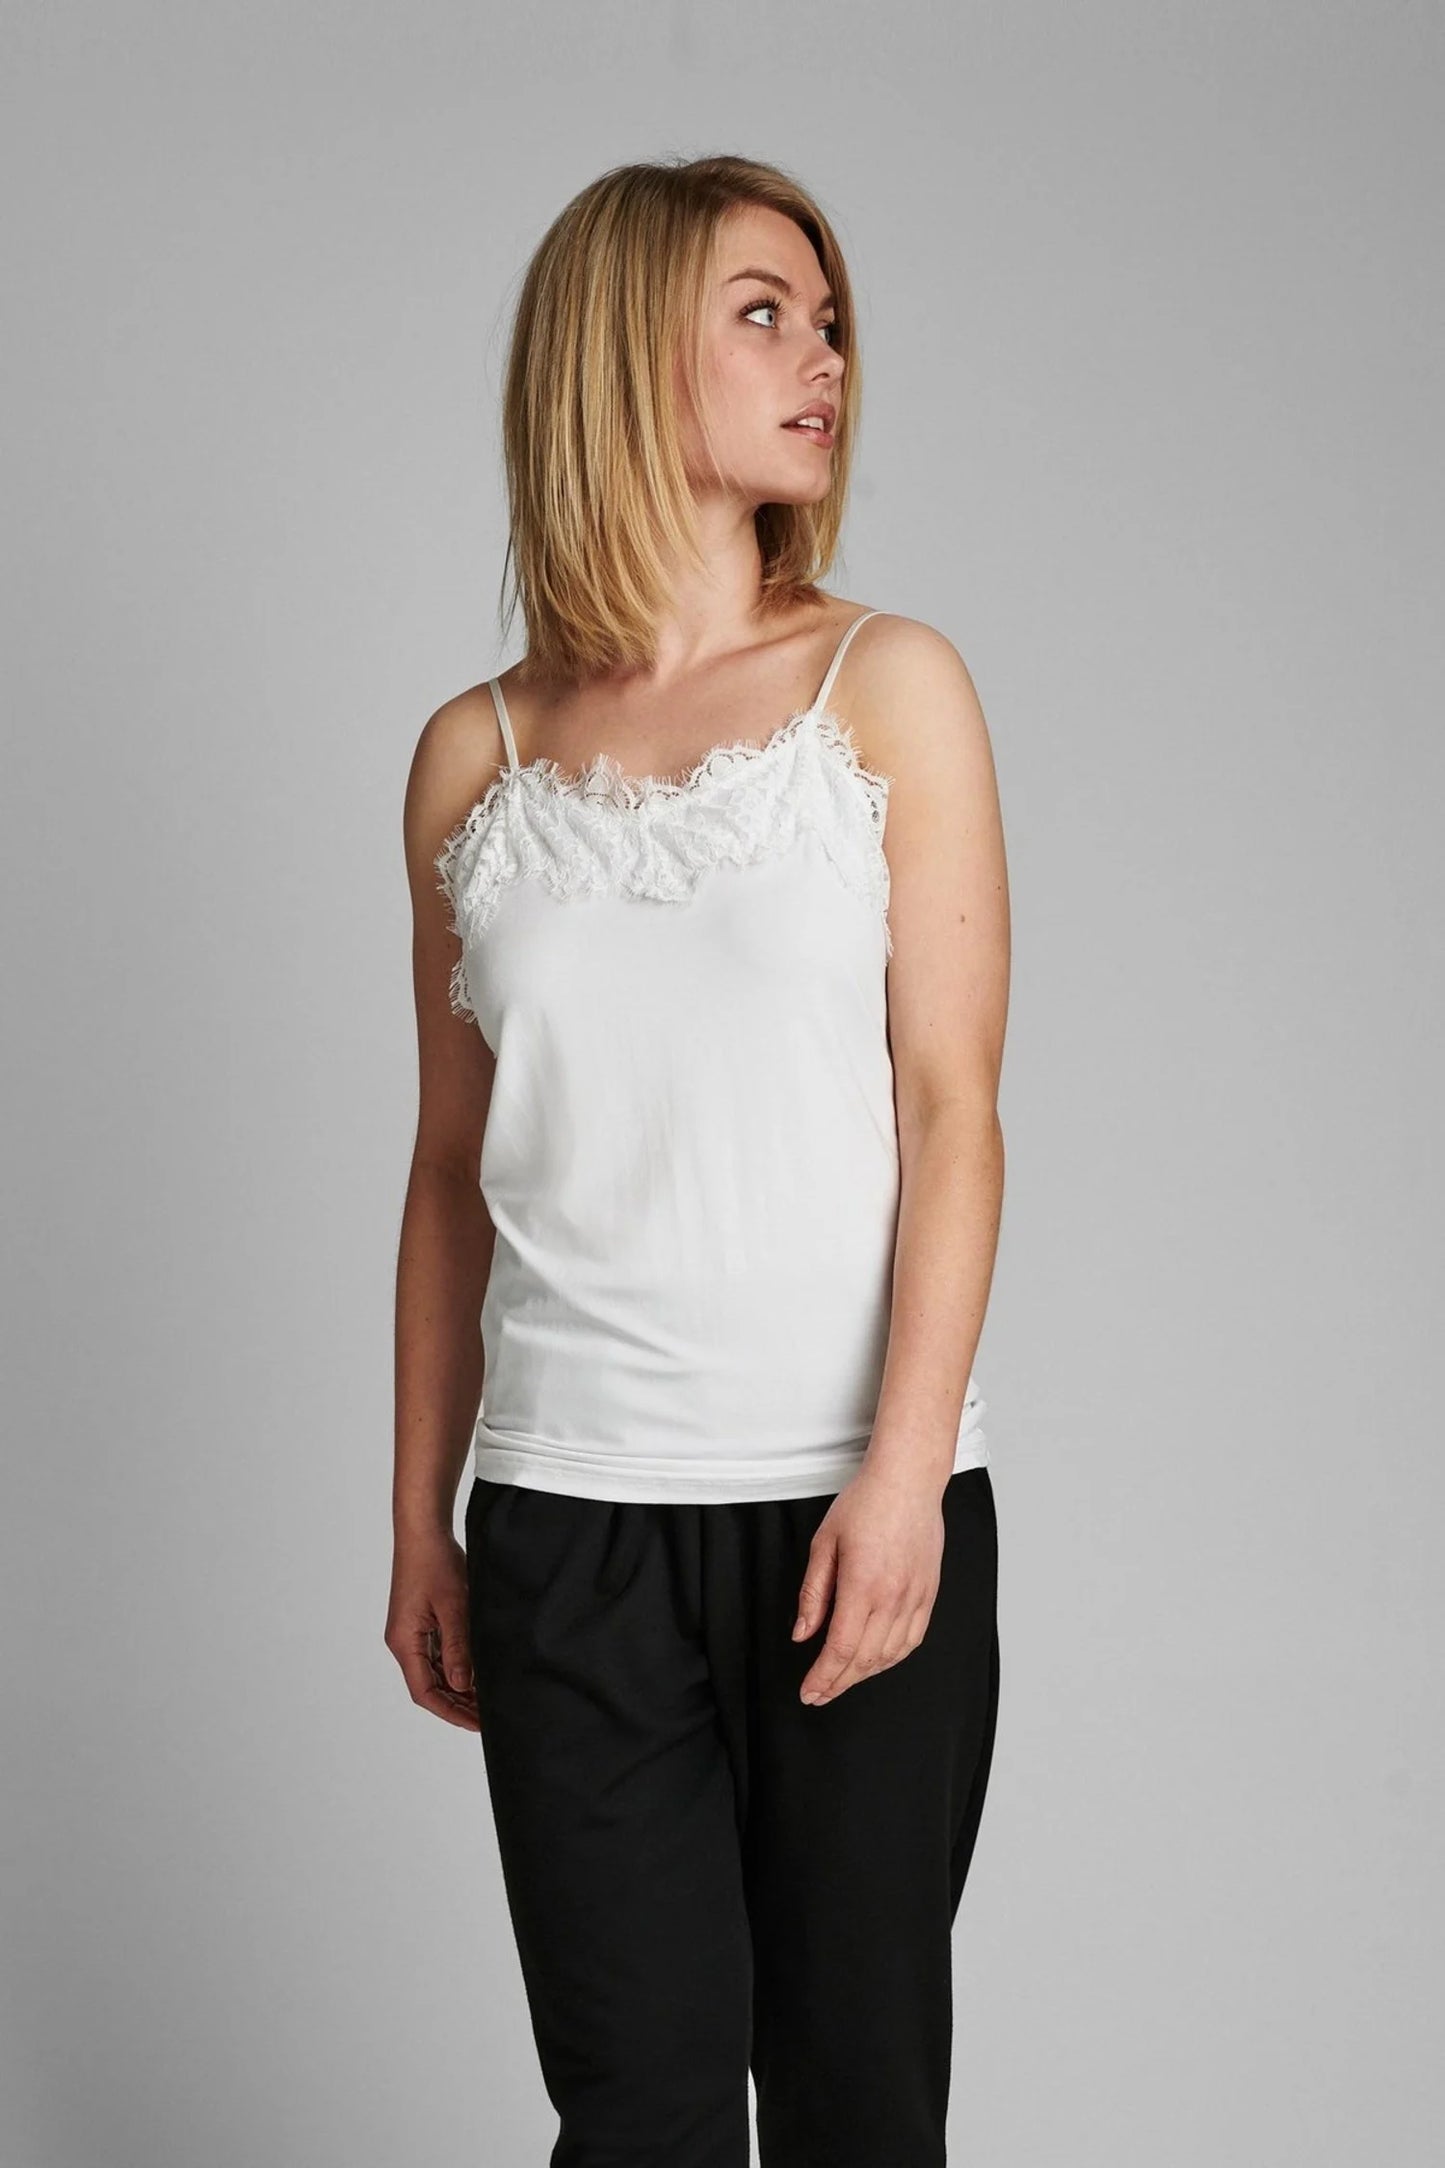 * Nubowie Lace Top Cami White*